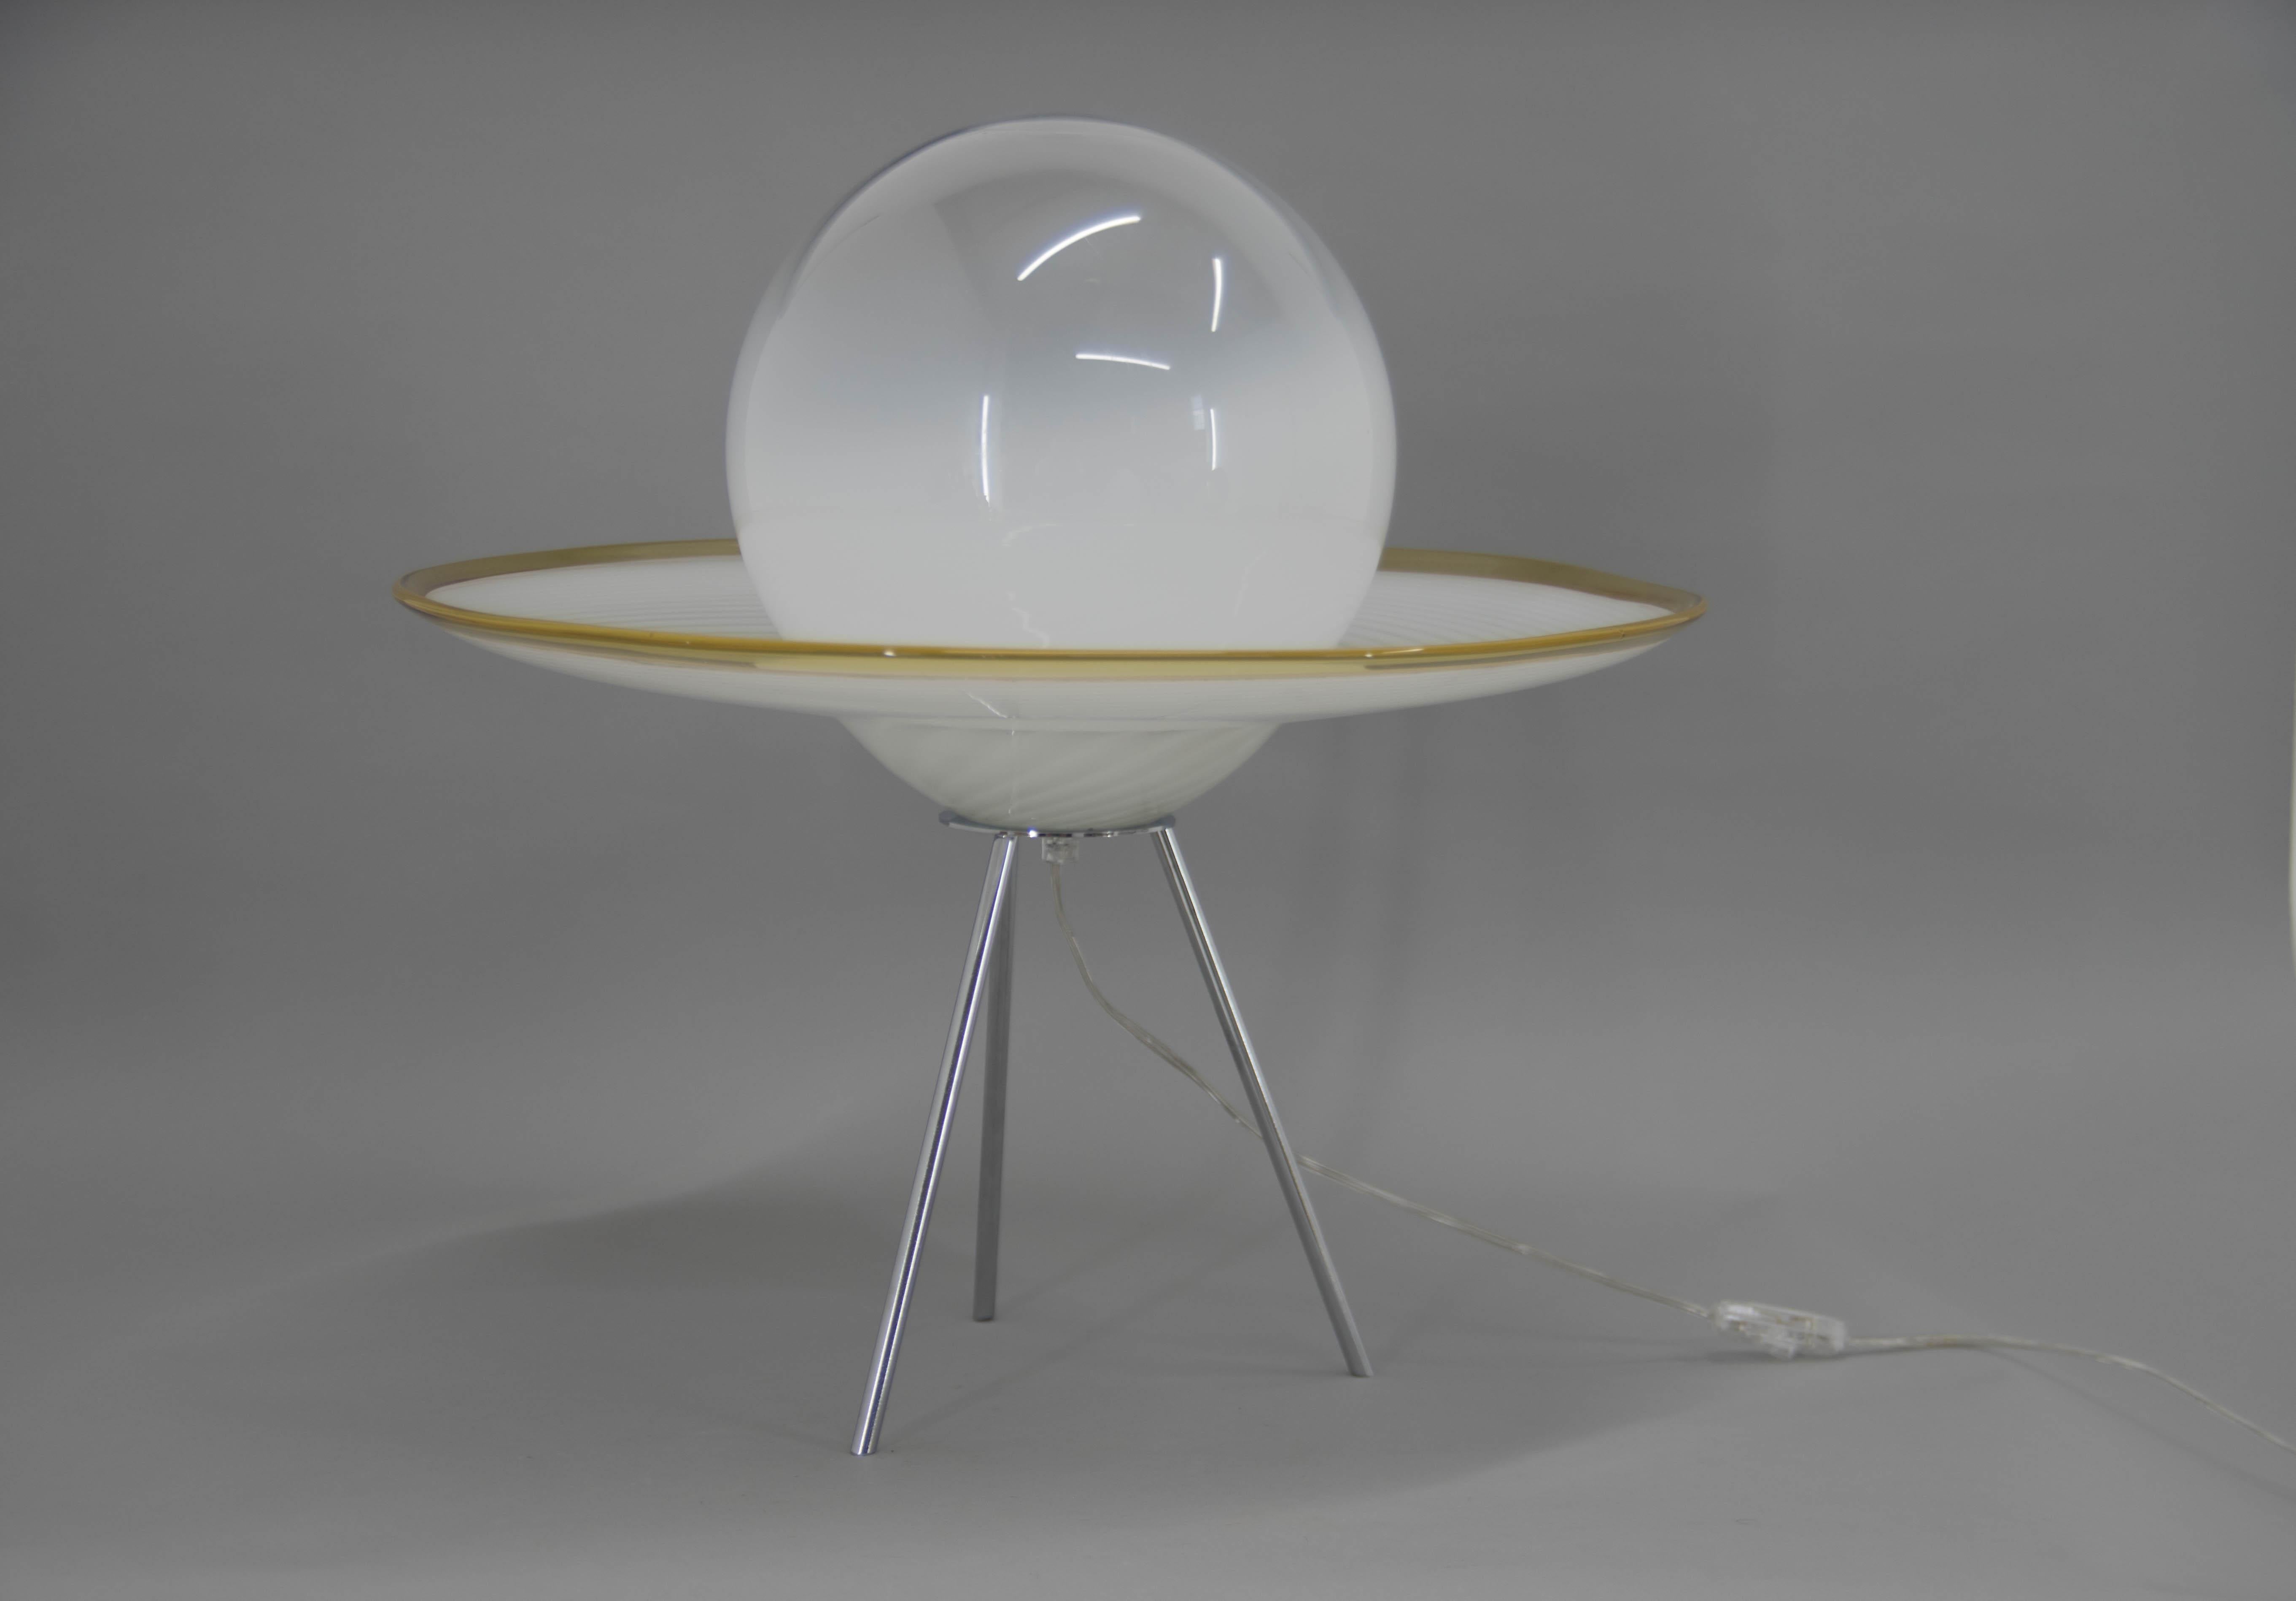 Murano Italian style modern table or floor lamp in a shape of Saturn.
Very good original condition.
1x60W, E25-E27 bulb
US plug adapter included.